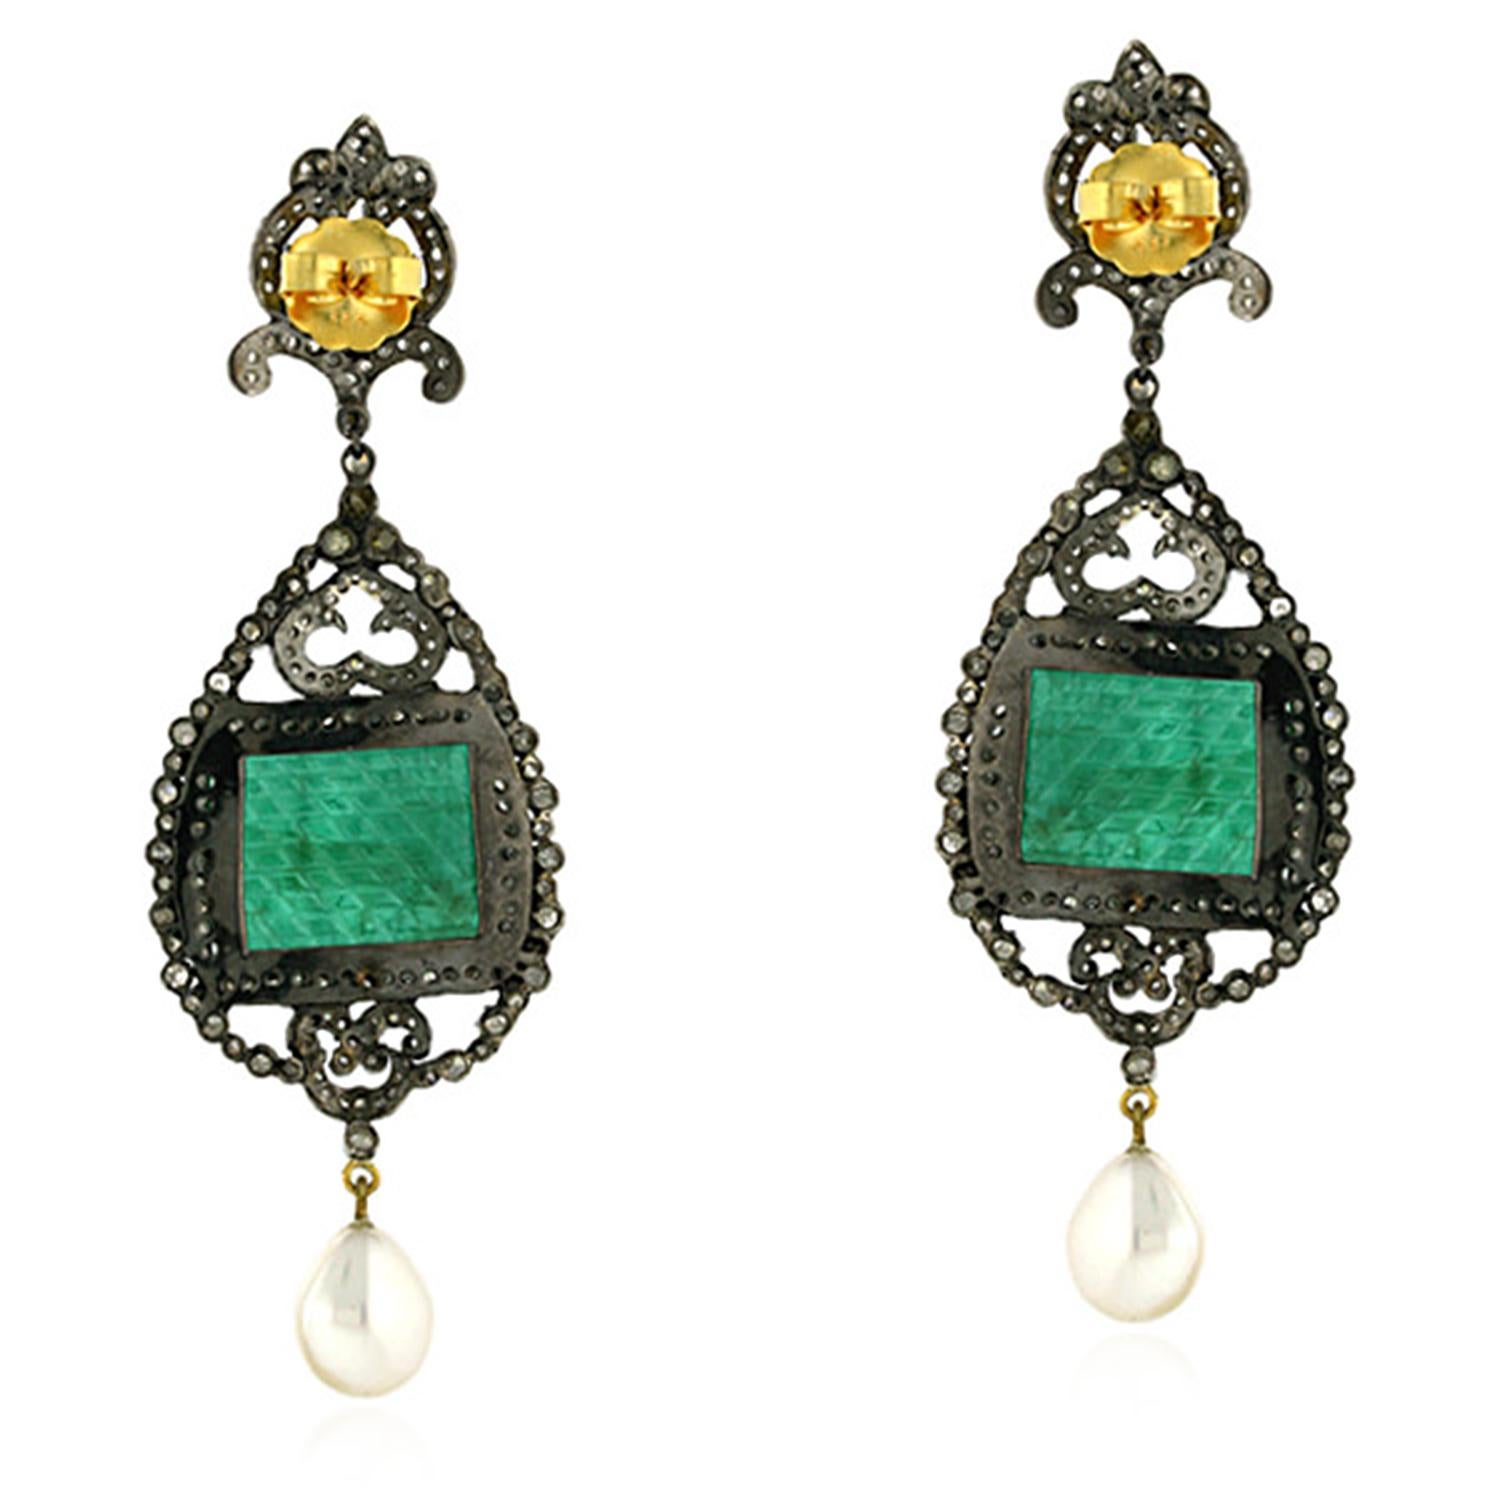 These hand carved earrings are meticulously crafted in 18-karat gold and sterling silver.  It is set in 49.65 carats Emerald, 12.9 carats pearl and 3.91 carats of glimmering diamonds.

FOLLOW  MEGHNA JEWELS storefront to view the latest collection &